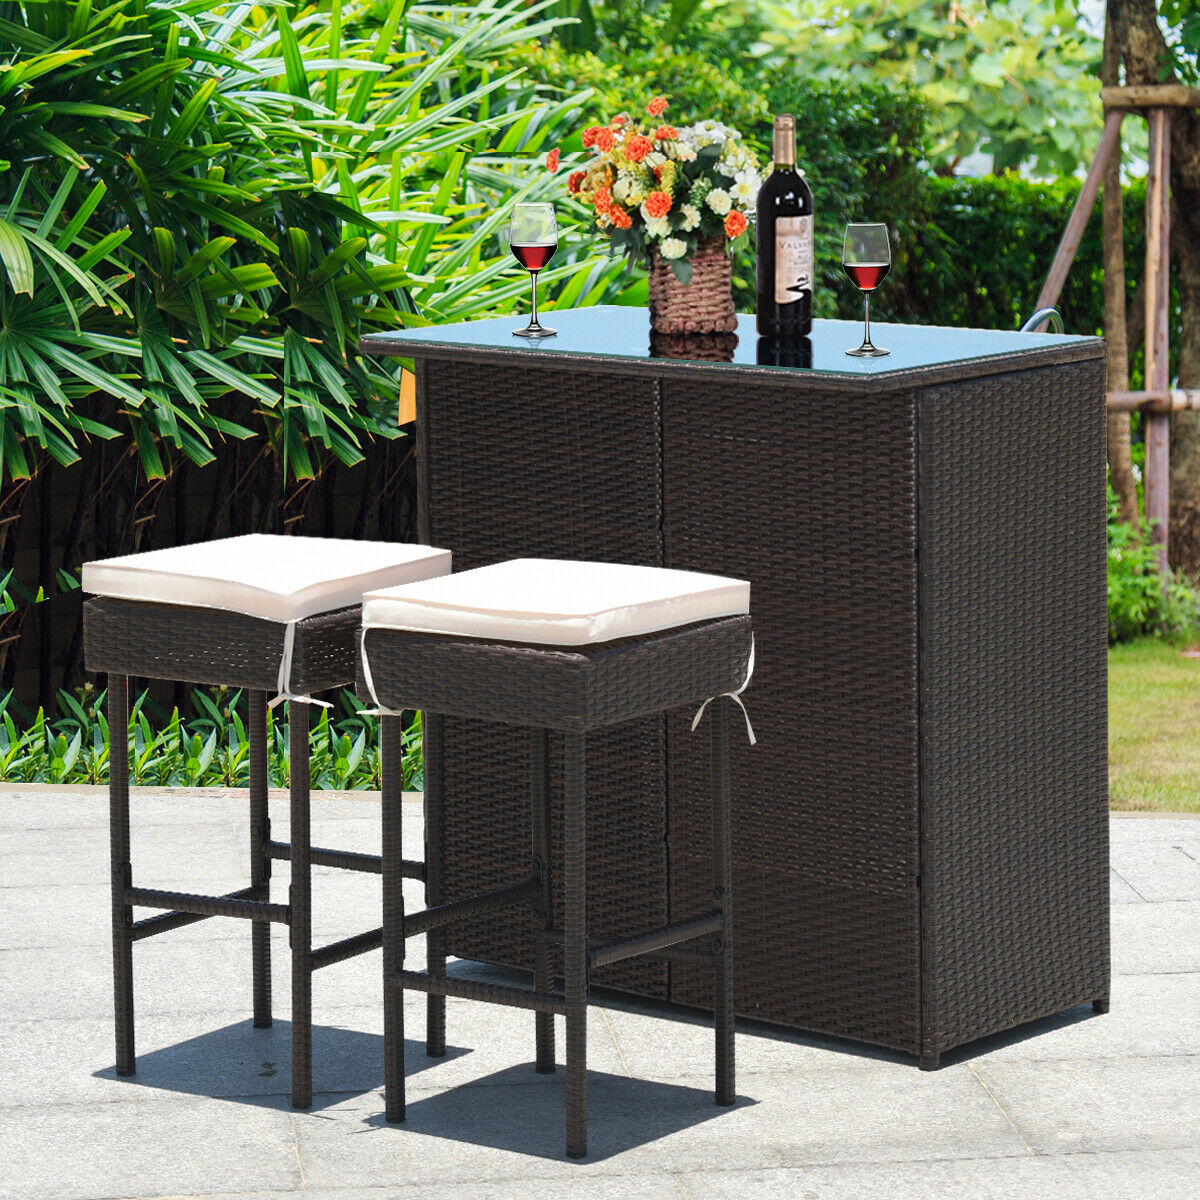 3PCS Patio Rattan Wicker Bar Table, Stools, Dining Set. Cushioned Chairs